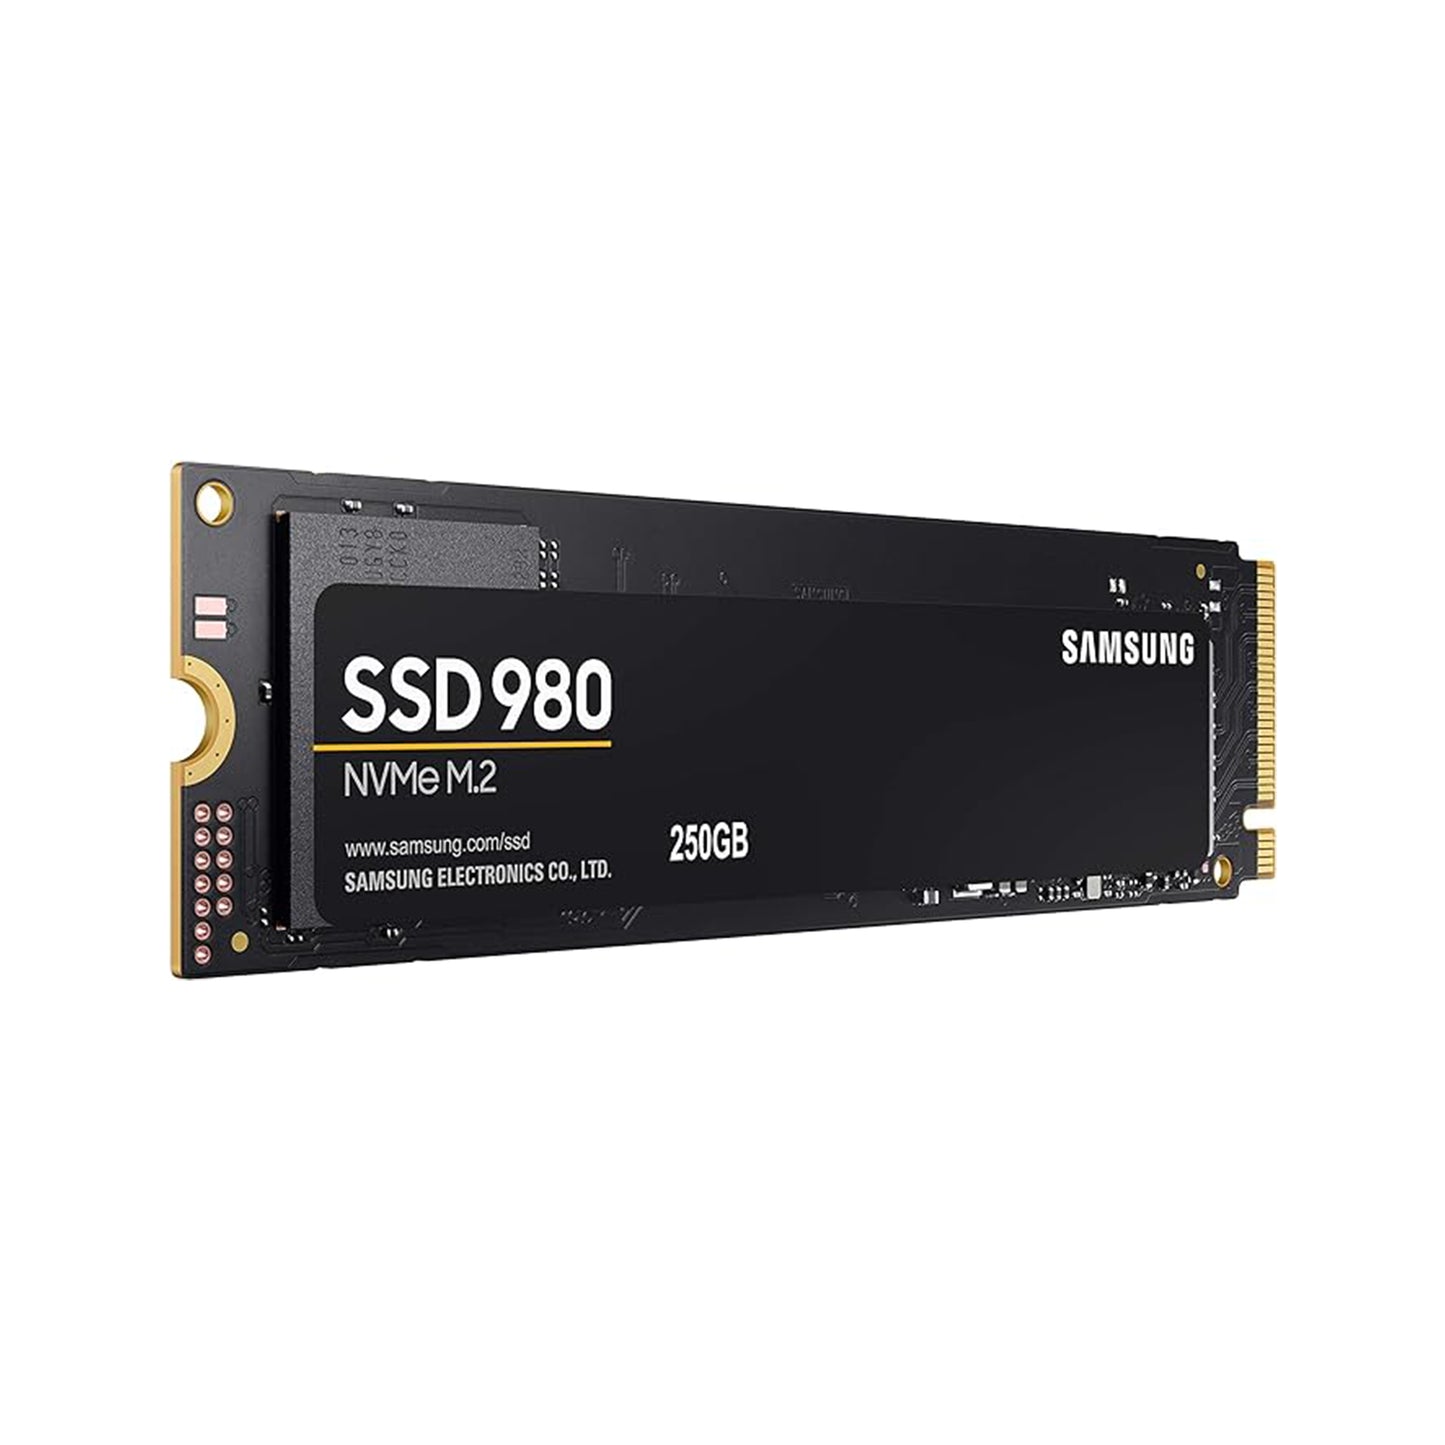 SAMSUNG 980 SSD 250GB PCle 3.0x4, NVMe M.2 2280, Internal Solid State Drive, Storage for PC, Laptops, Gaming and More, HMB Technology, Intelligent Turbowrite, Speeds up-to 3,500MB/s, MZ-V8V250B/AM